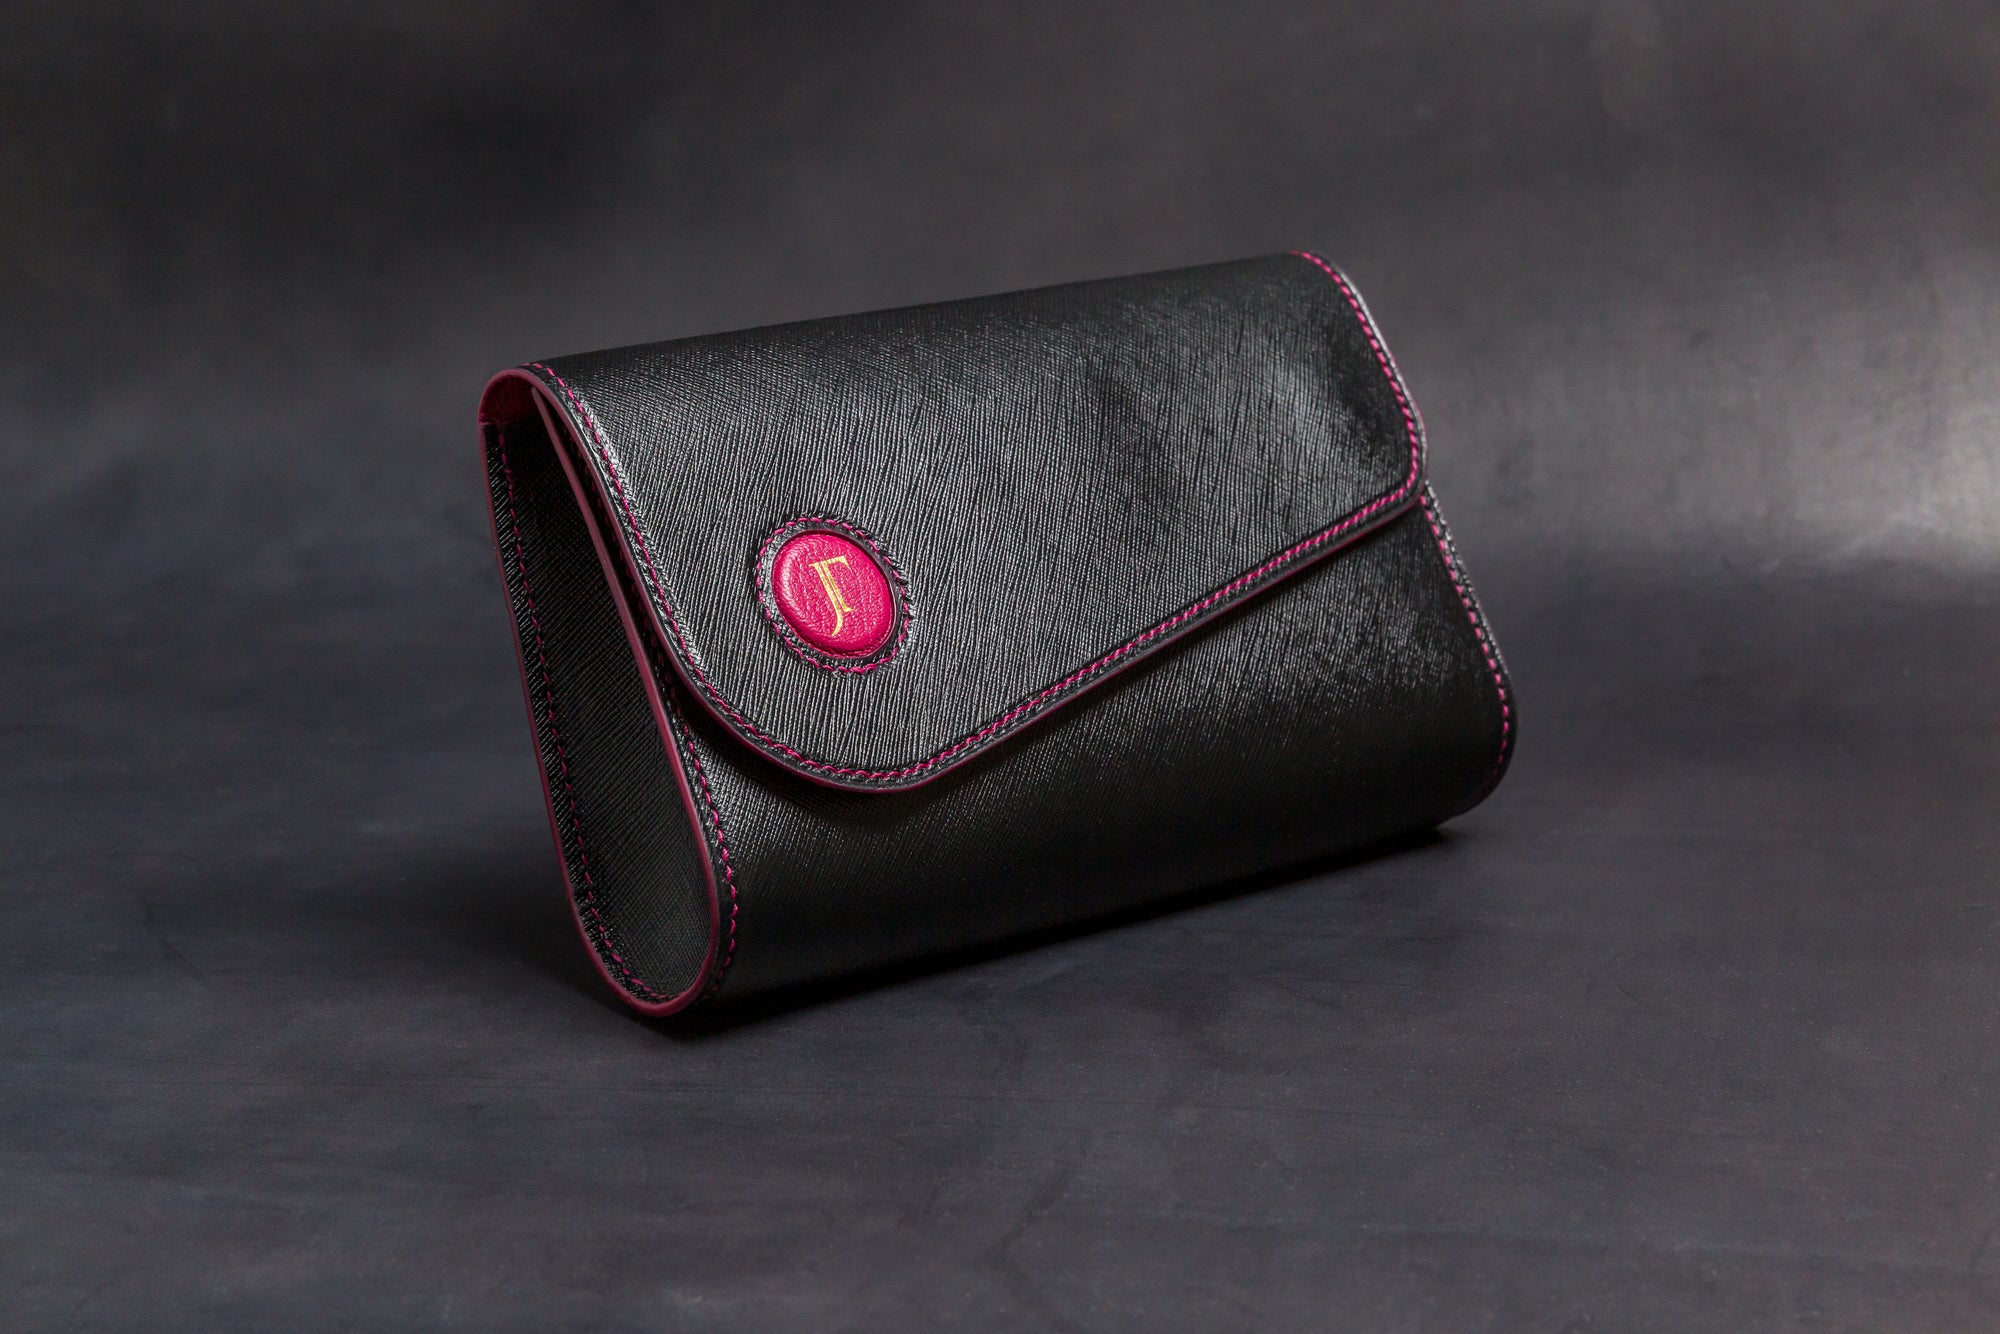 Making of the Clarendon Clutch